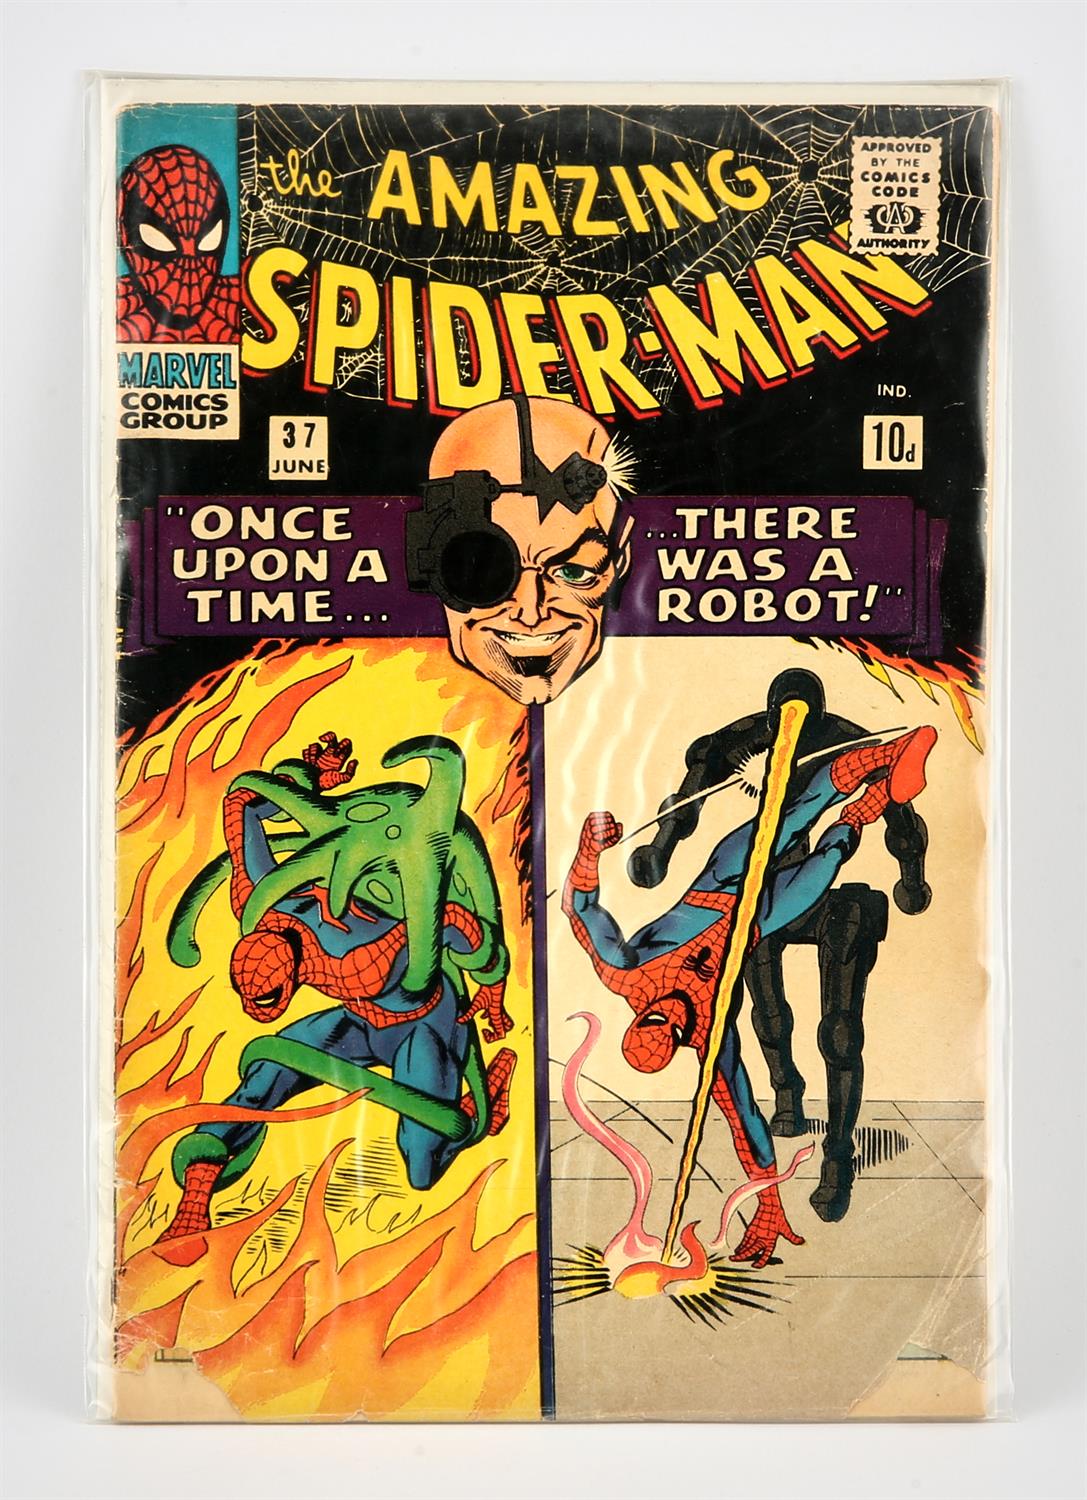 AMMENDED DESCRIPTION Marvel Comics: The Amazing Spider-Man No. 37 (1966). Featuring the 1st